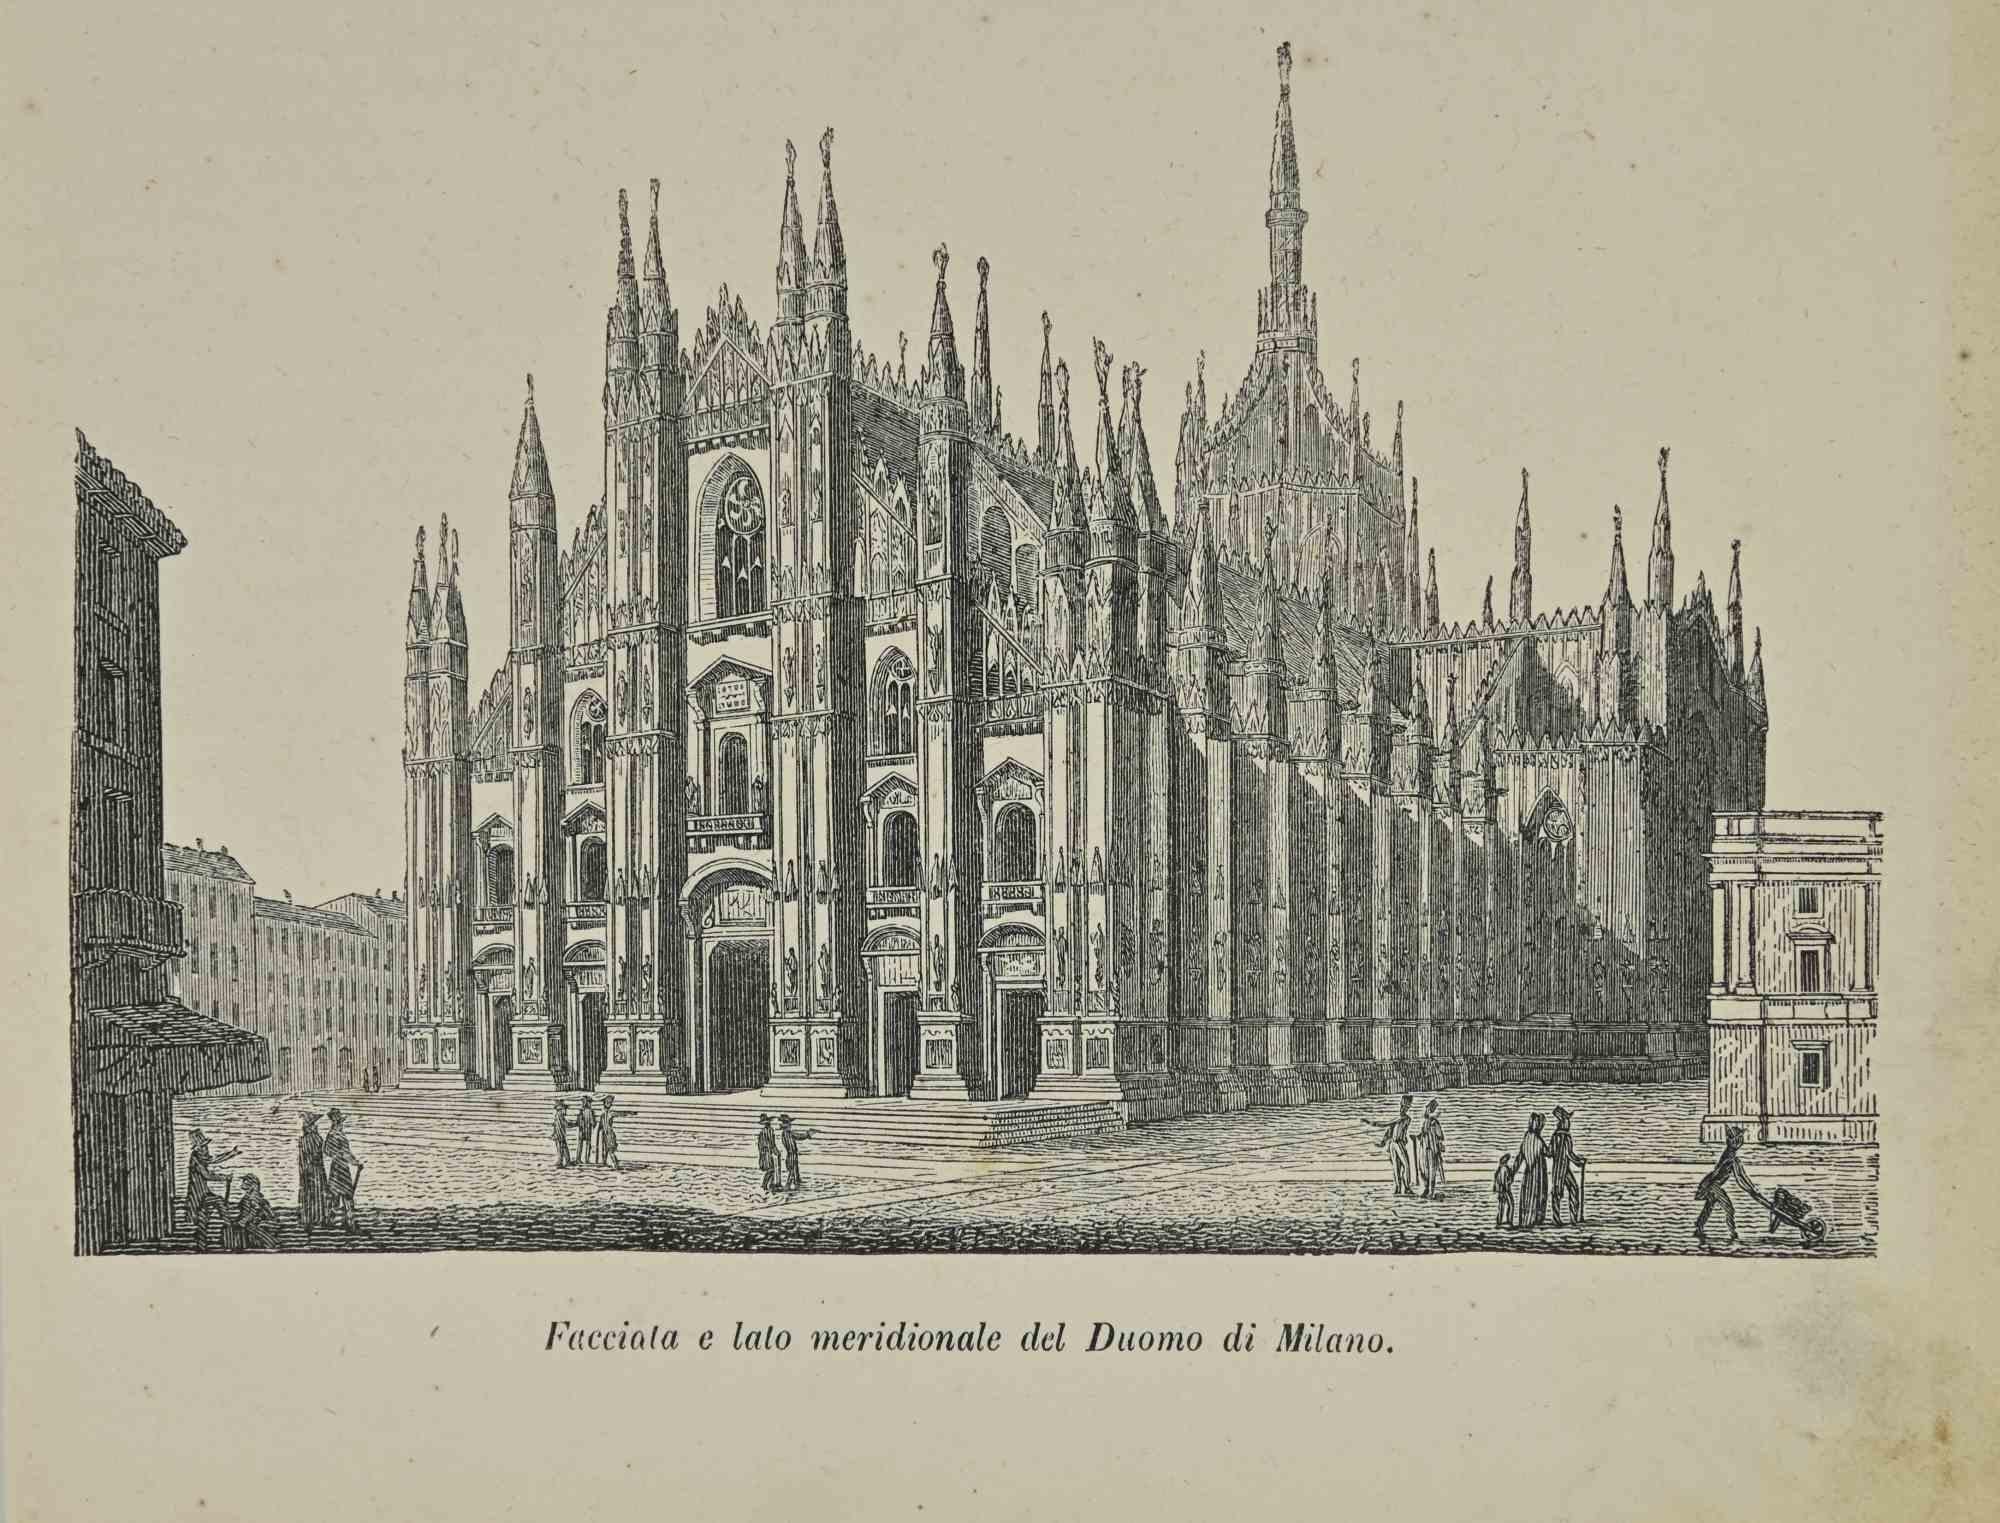 Uses and Customs - Facade and South Side of the Cathedral of Milan - 1862